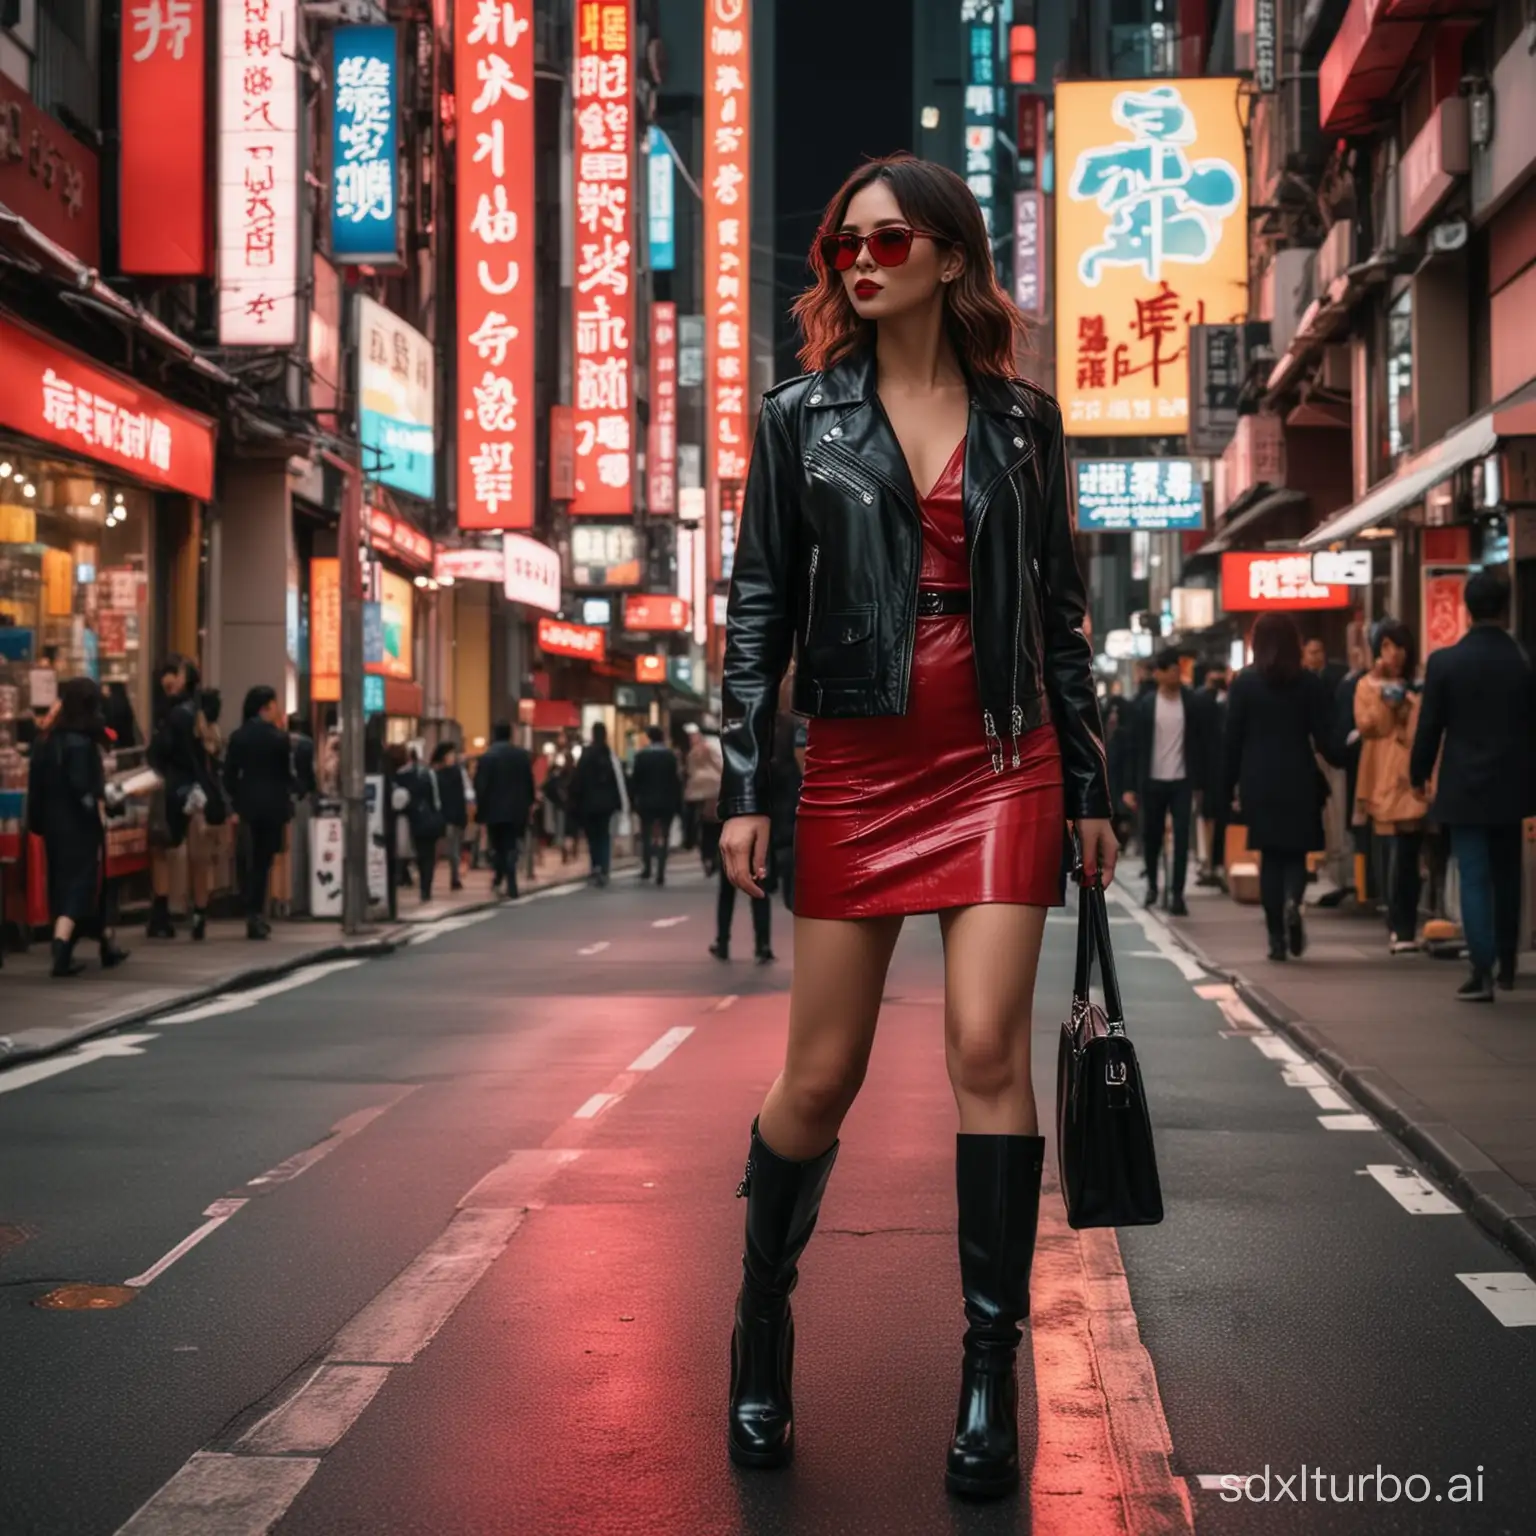 A stylish woman walks down a Tokyo street filled with warm glowing neon and animated city signage. She wears a black leather jacket, a long red dress, and black boots, and carries a black purse. She wears sunglasses and red lipstick. She walks confidently and casually. The street is damp and reflective, creating a mirror effect of the colorful lights. Many pedestrians walk about.